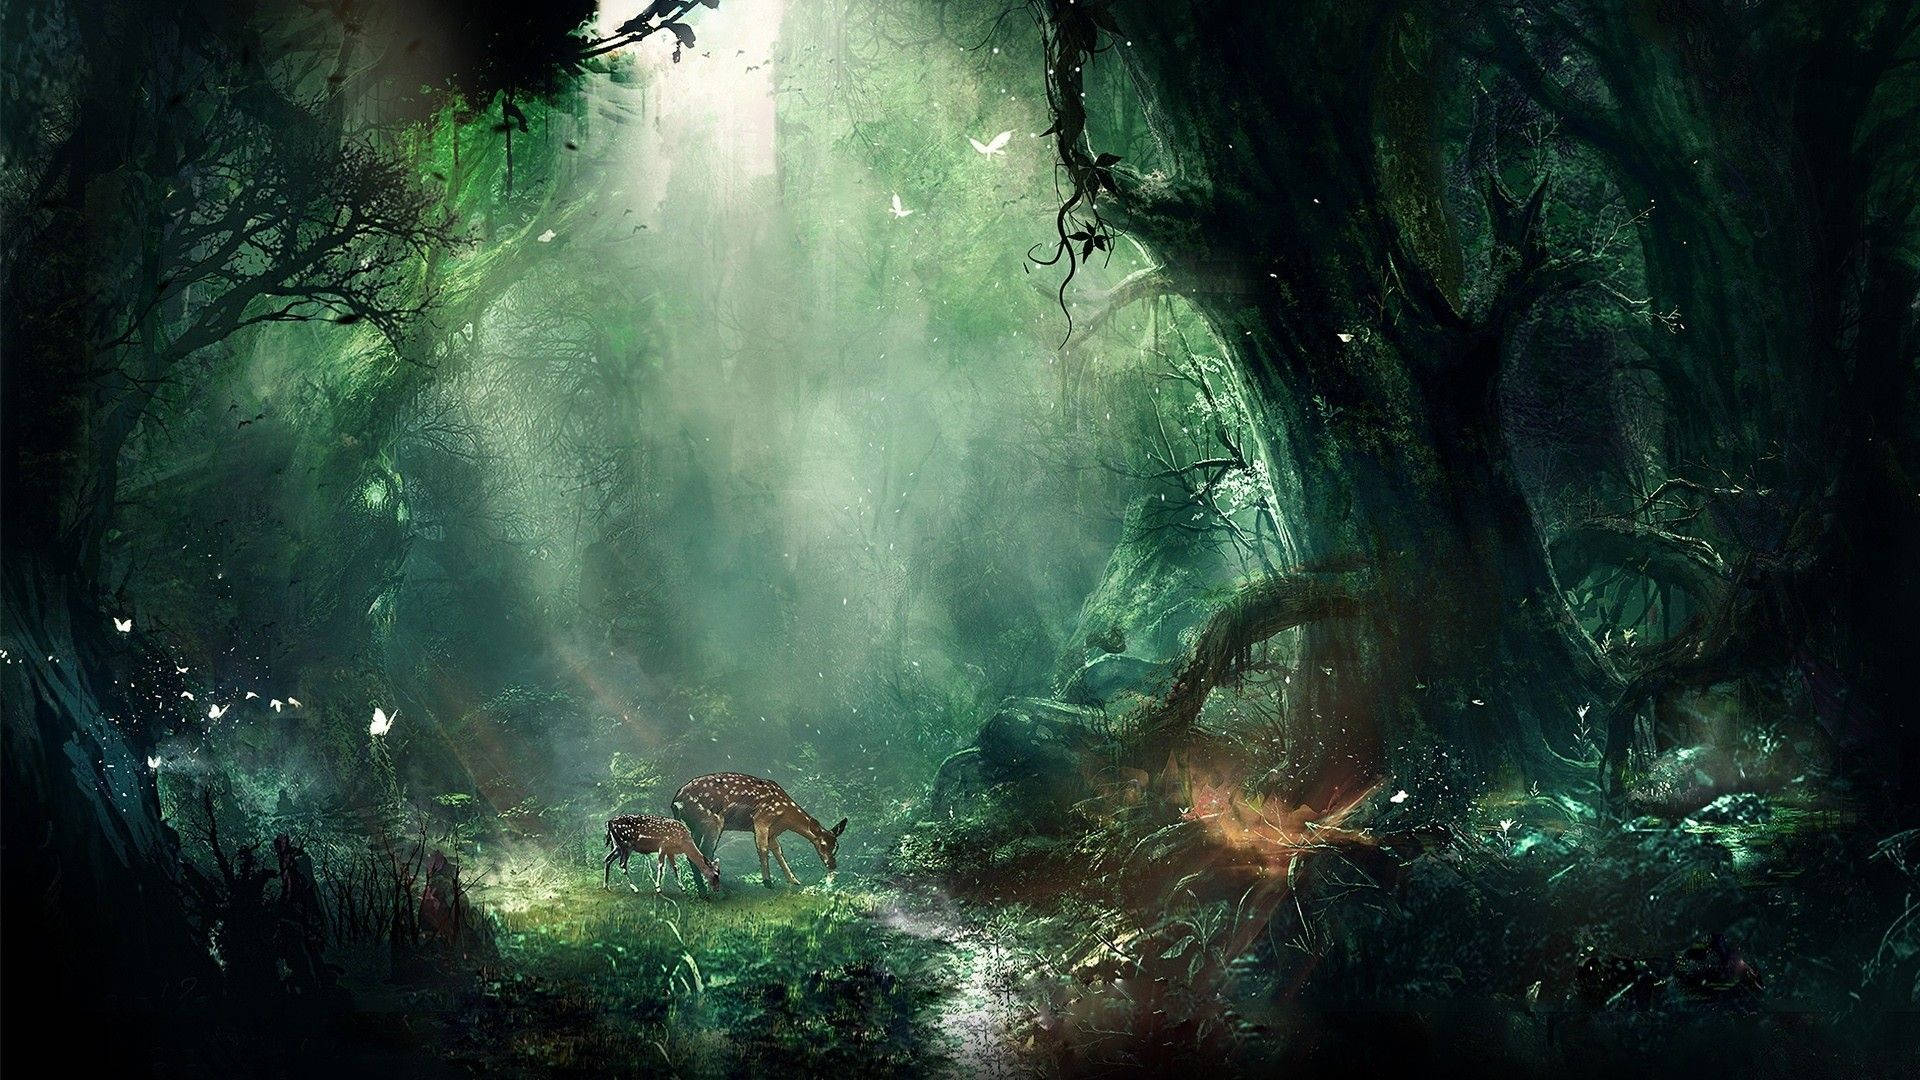 Magical Fantasy Forest